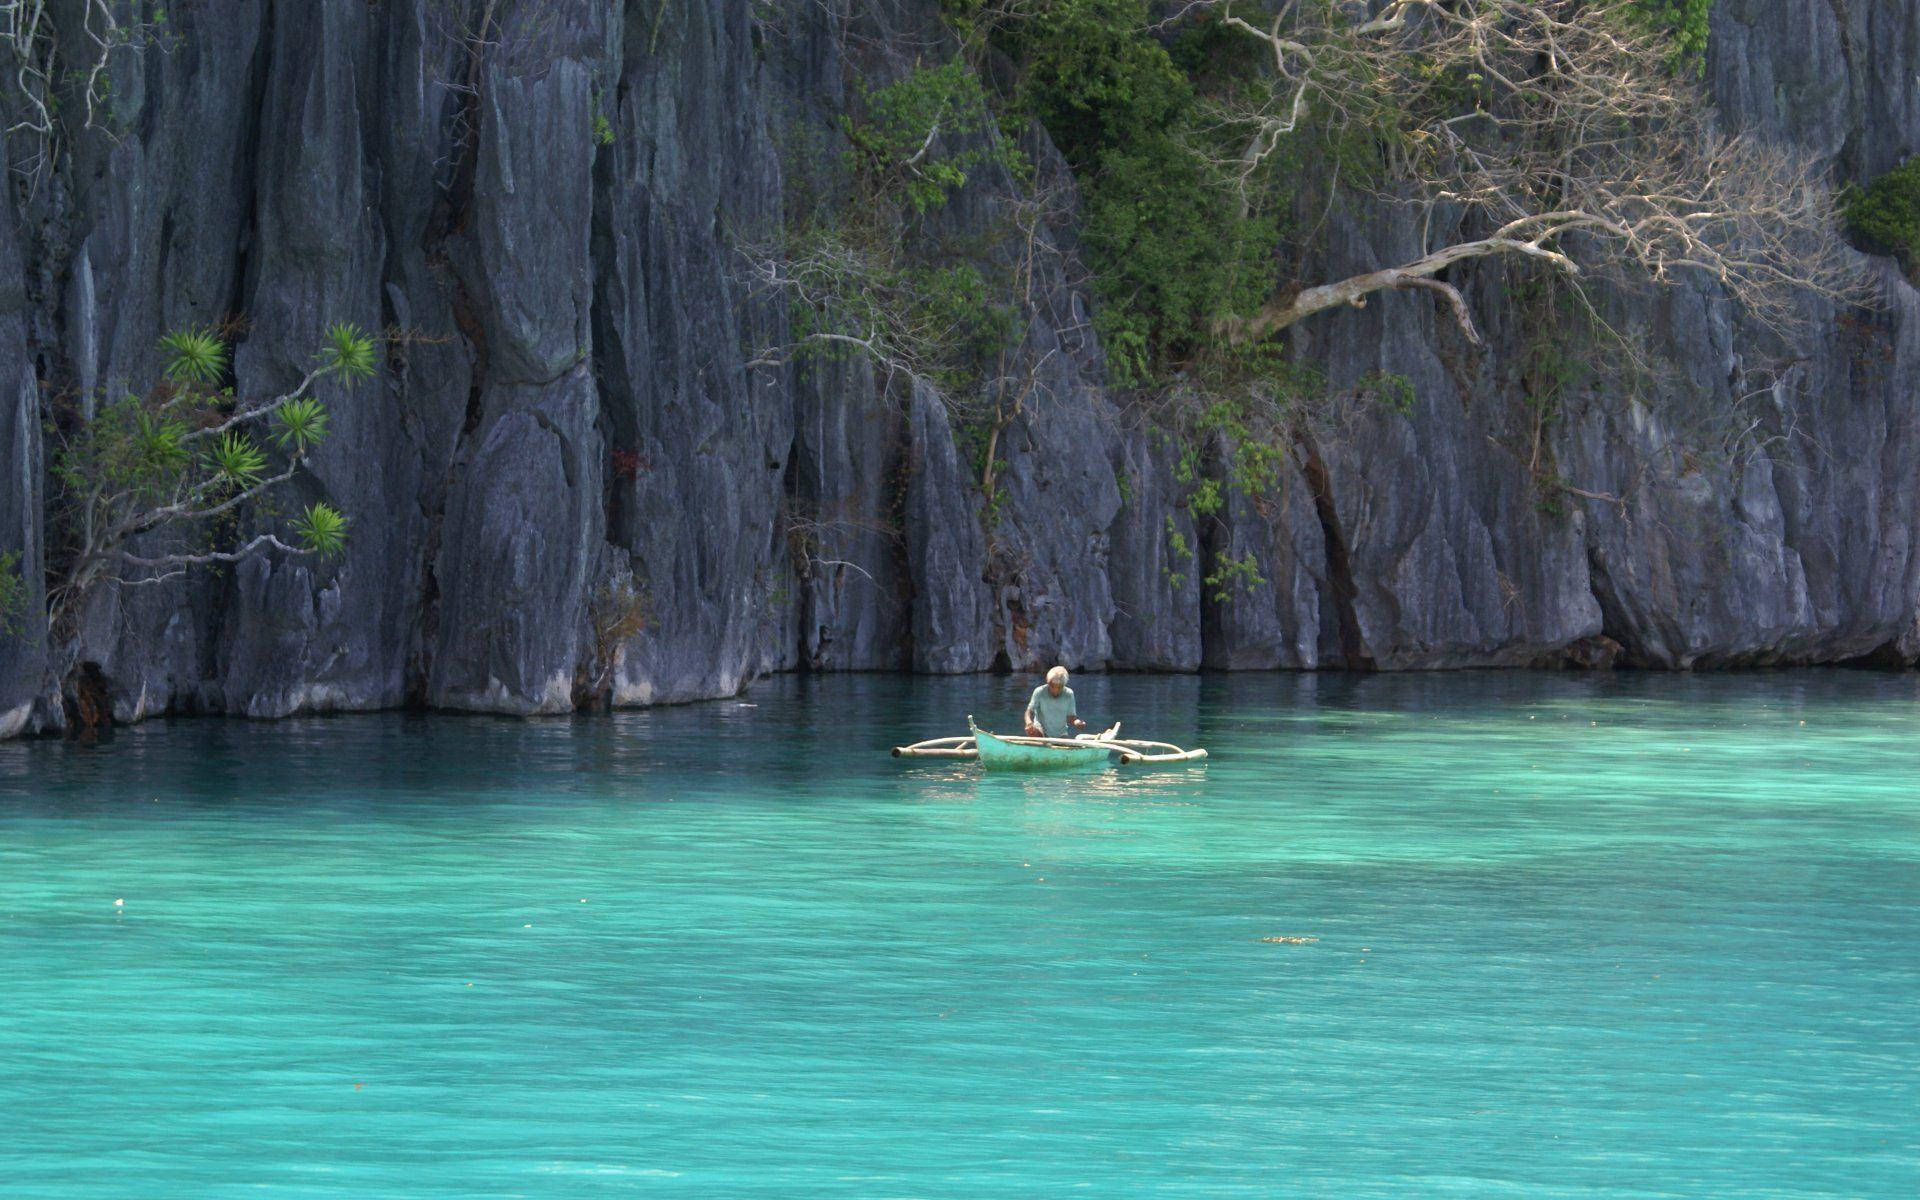 Caption: Stunning Views Of The Crystal Clear Waters In The Philippines